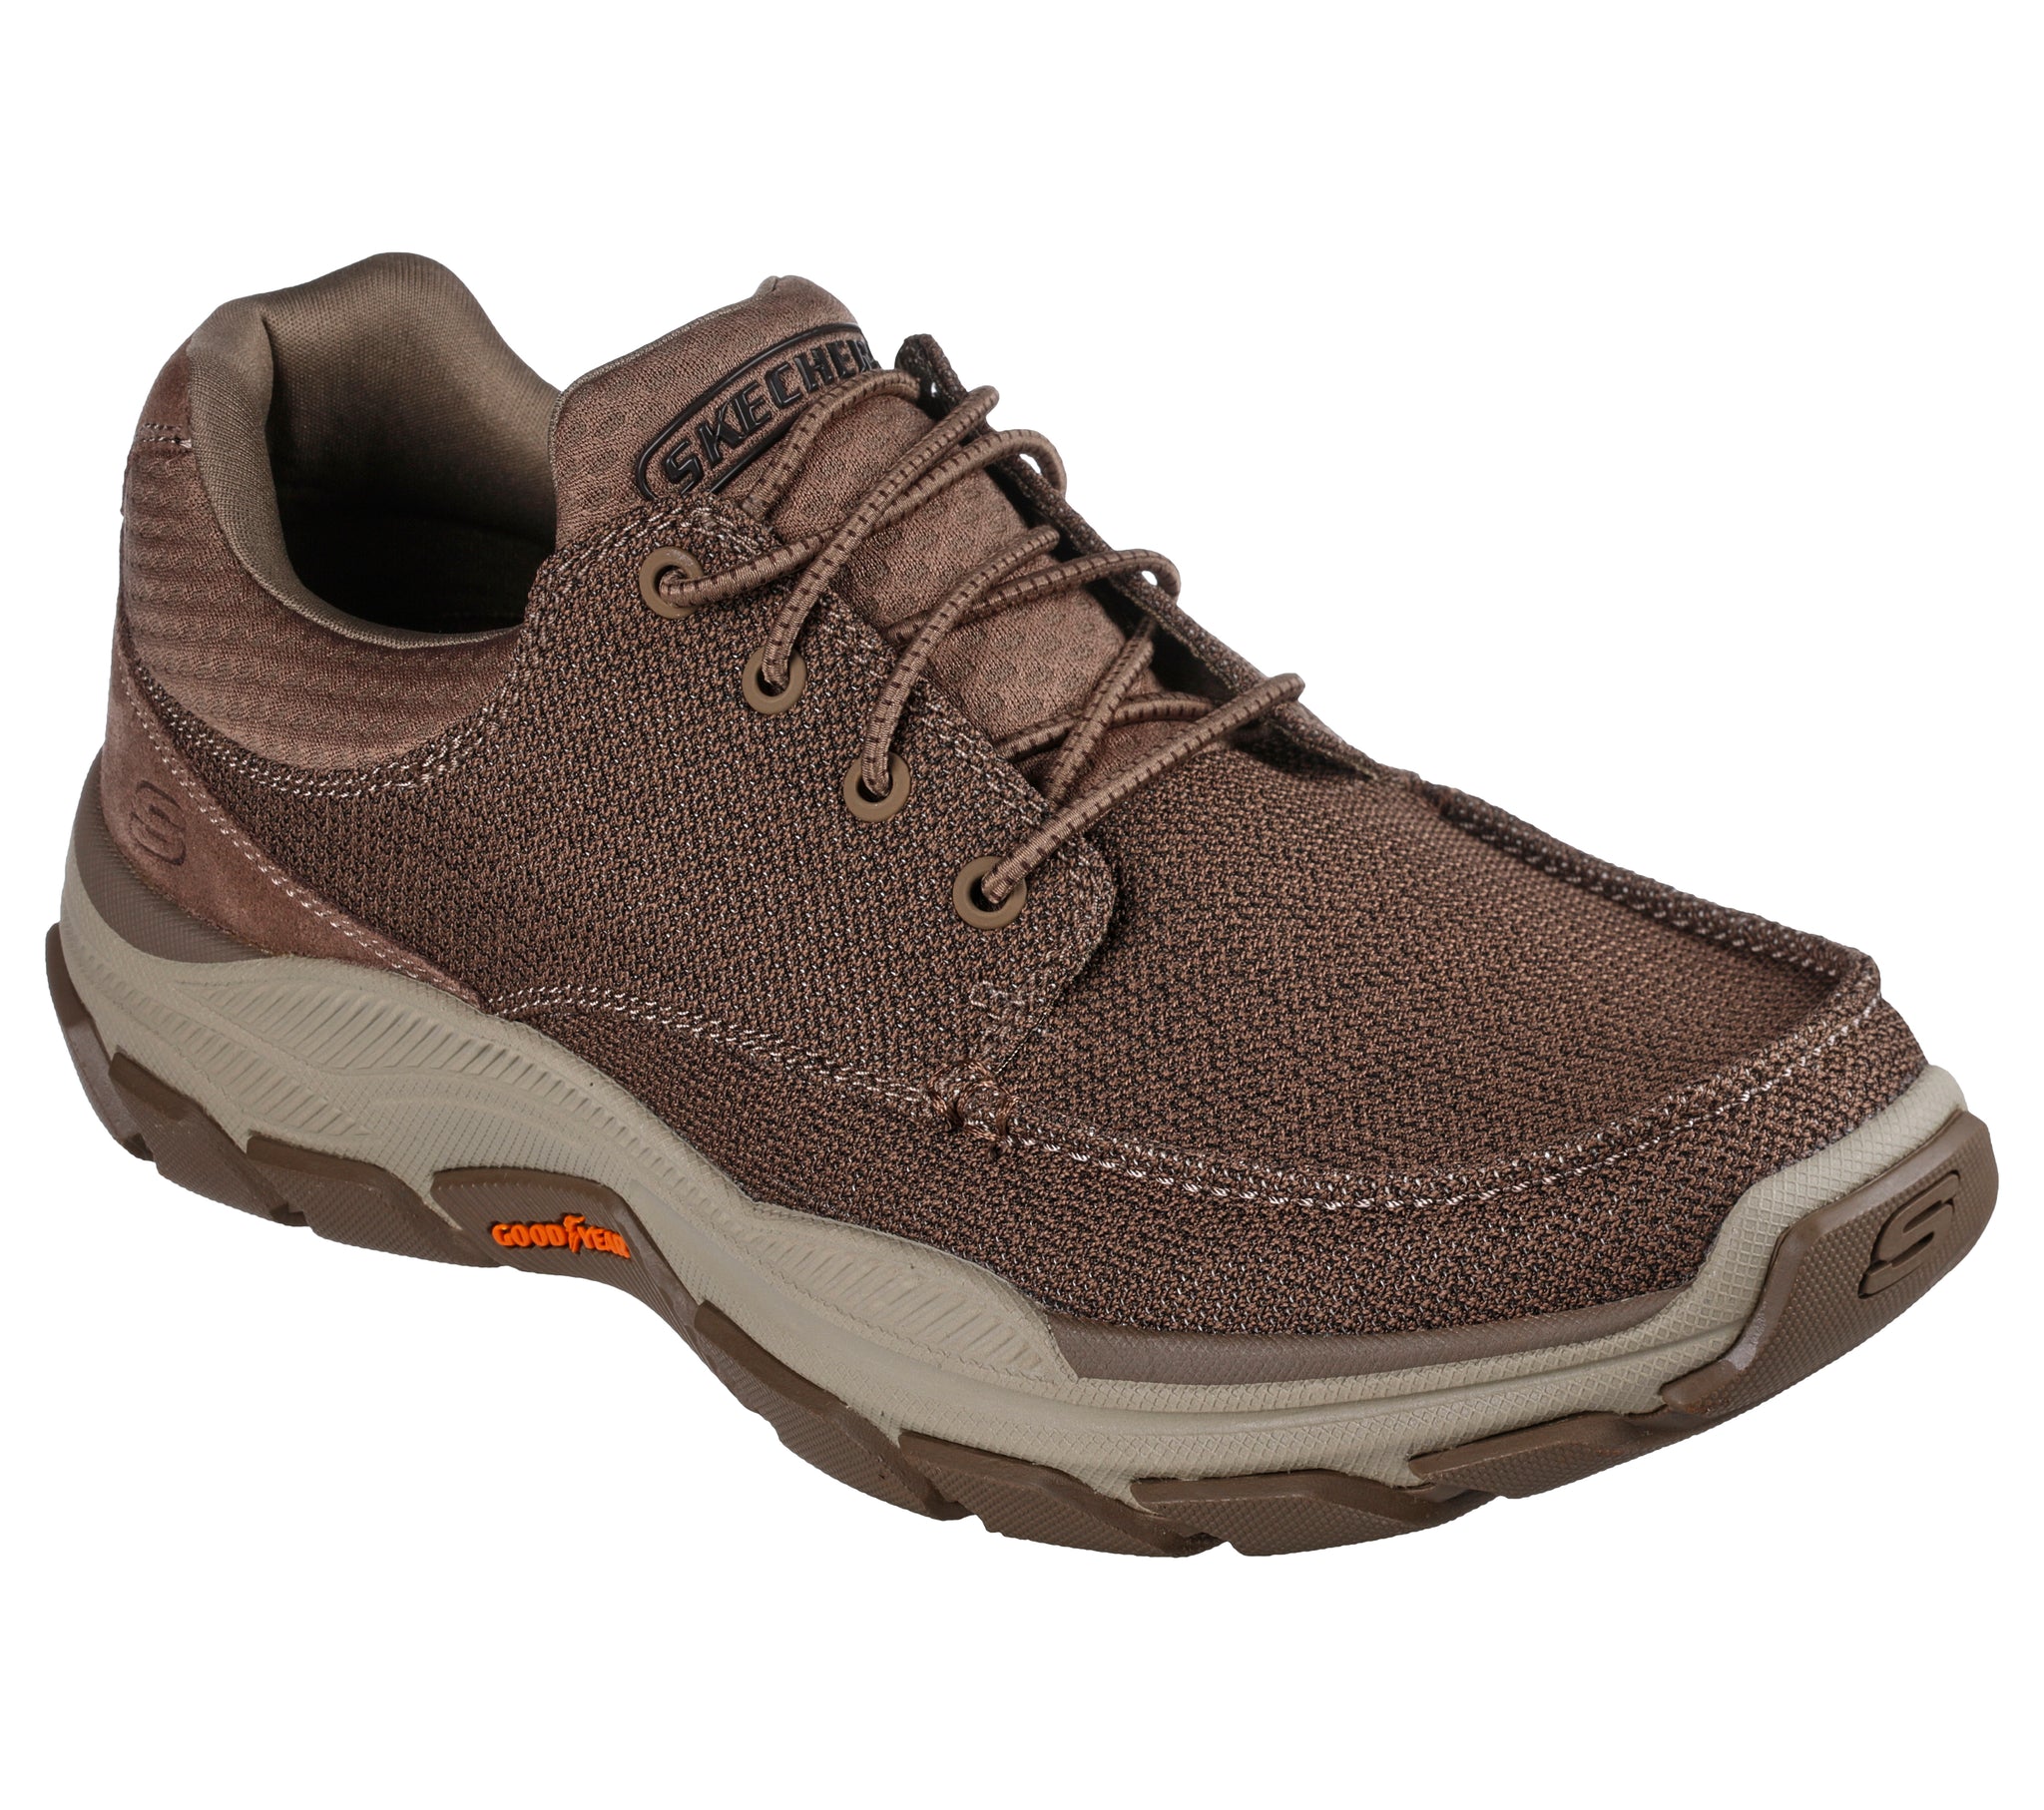 204565 LTBR - RELAXED FIT: RESPECTED - SARTELL - Shoess